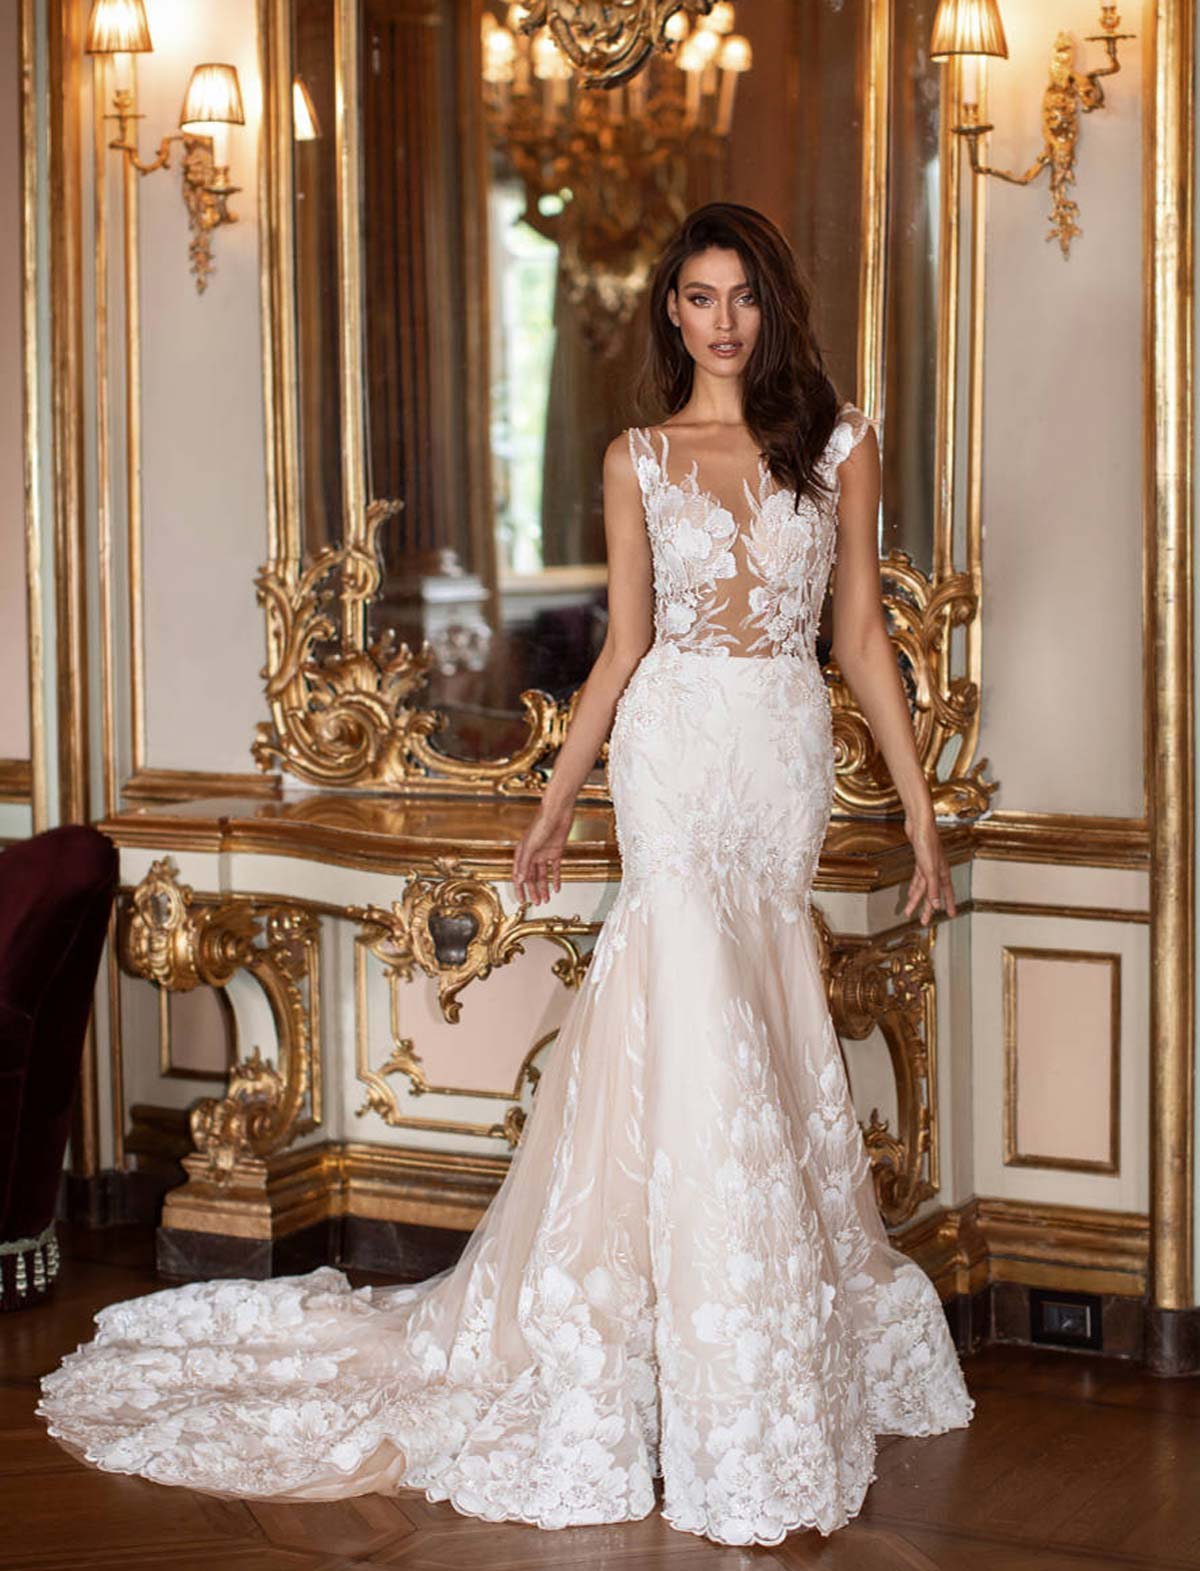 Wedding Dresses in Tuscany Italy - Le ...